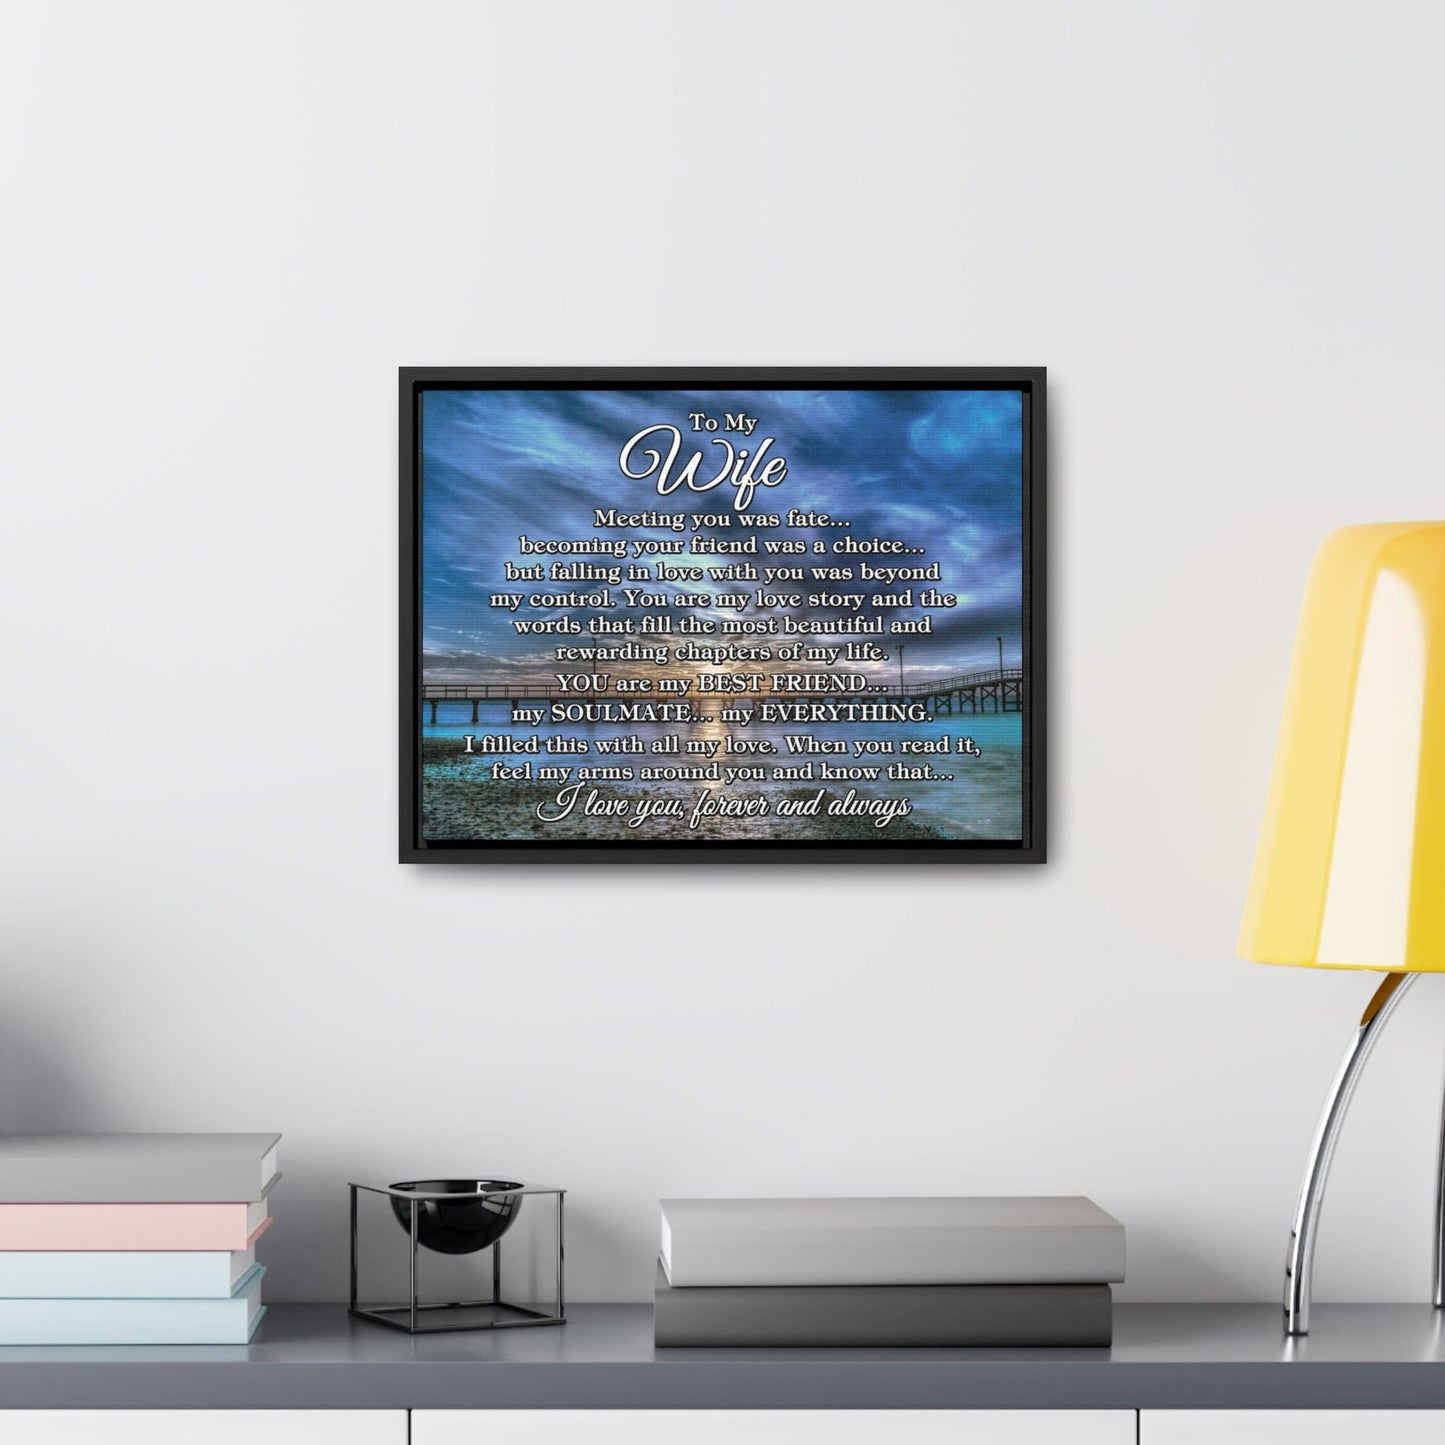 To My Wife "Meeting you was..." Framed Canvas (Gulf Pier Blue Sunset)